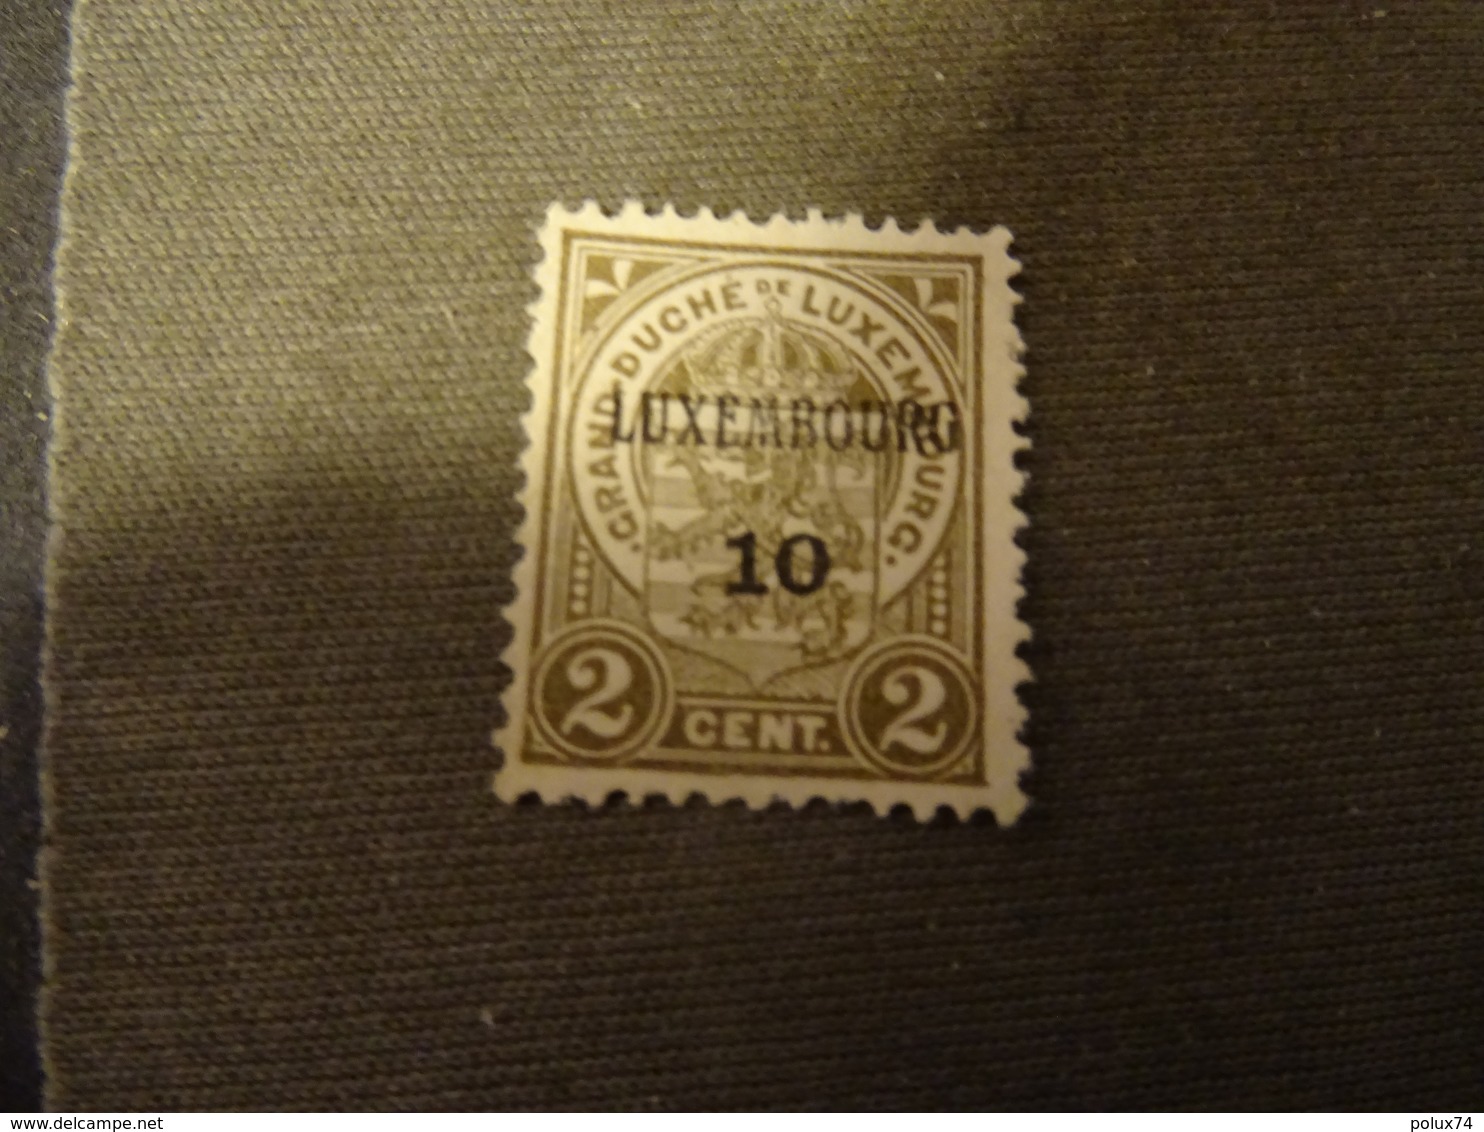 LUXEMBOURG  Timbre PREO  1910 -SG - 1907-24 Coat Of Arms